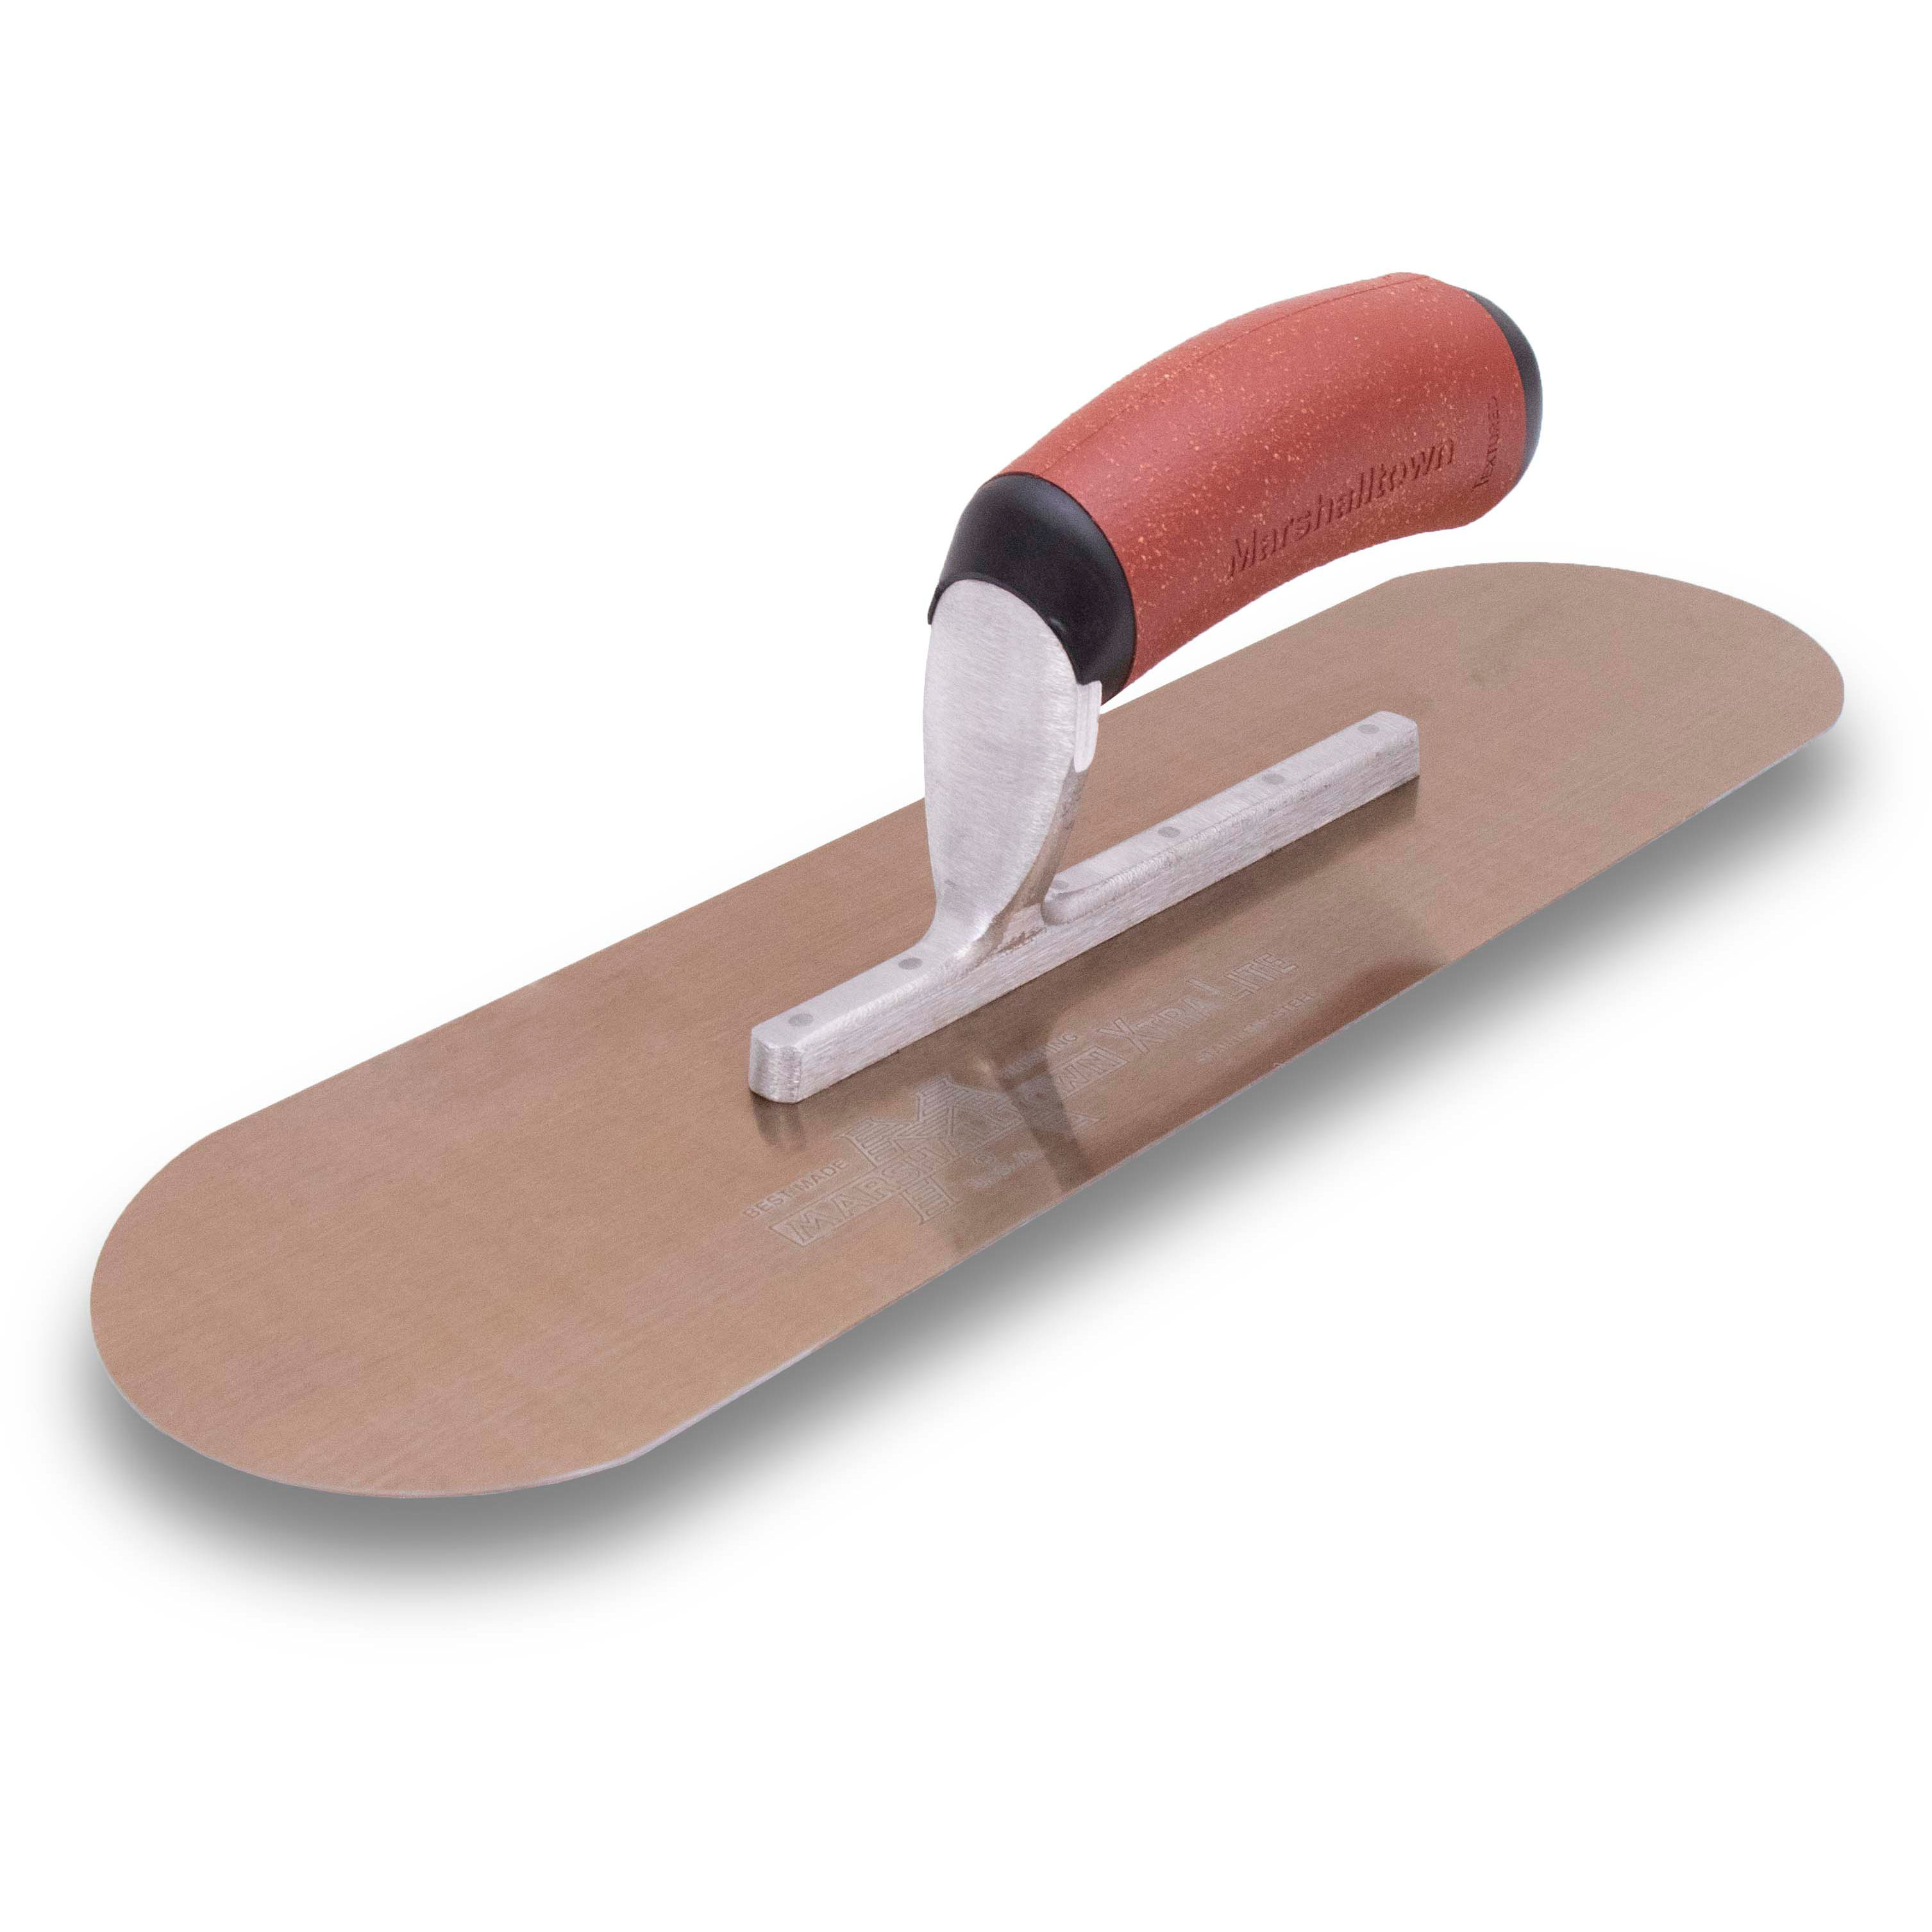 Marshalltown SP164GSDC 16in x 4in Golden Stainless Steel Pool Trowel with DuraCork Handle SP164GSDC